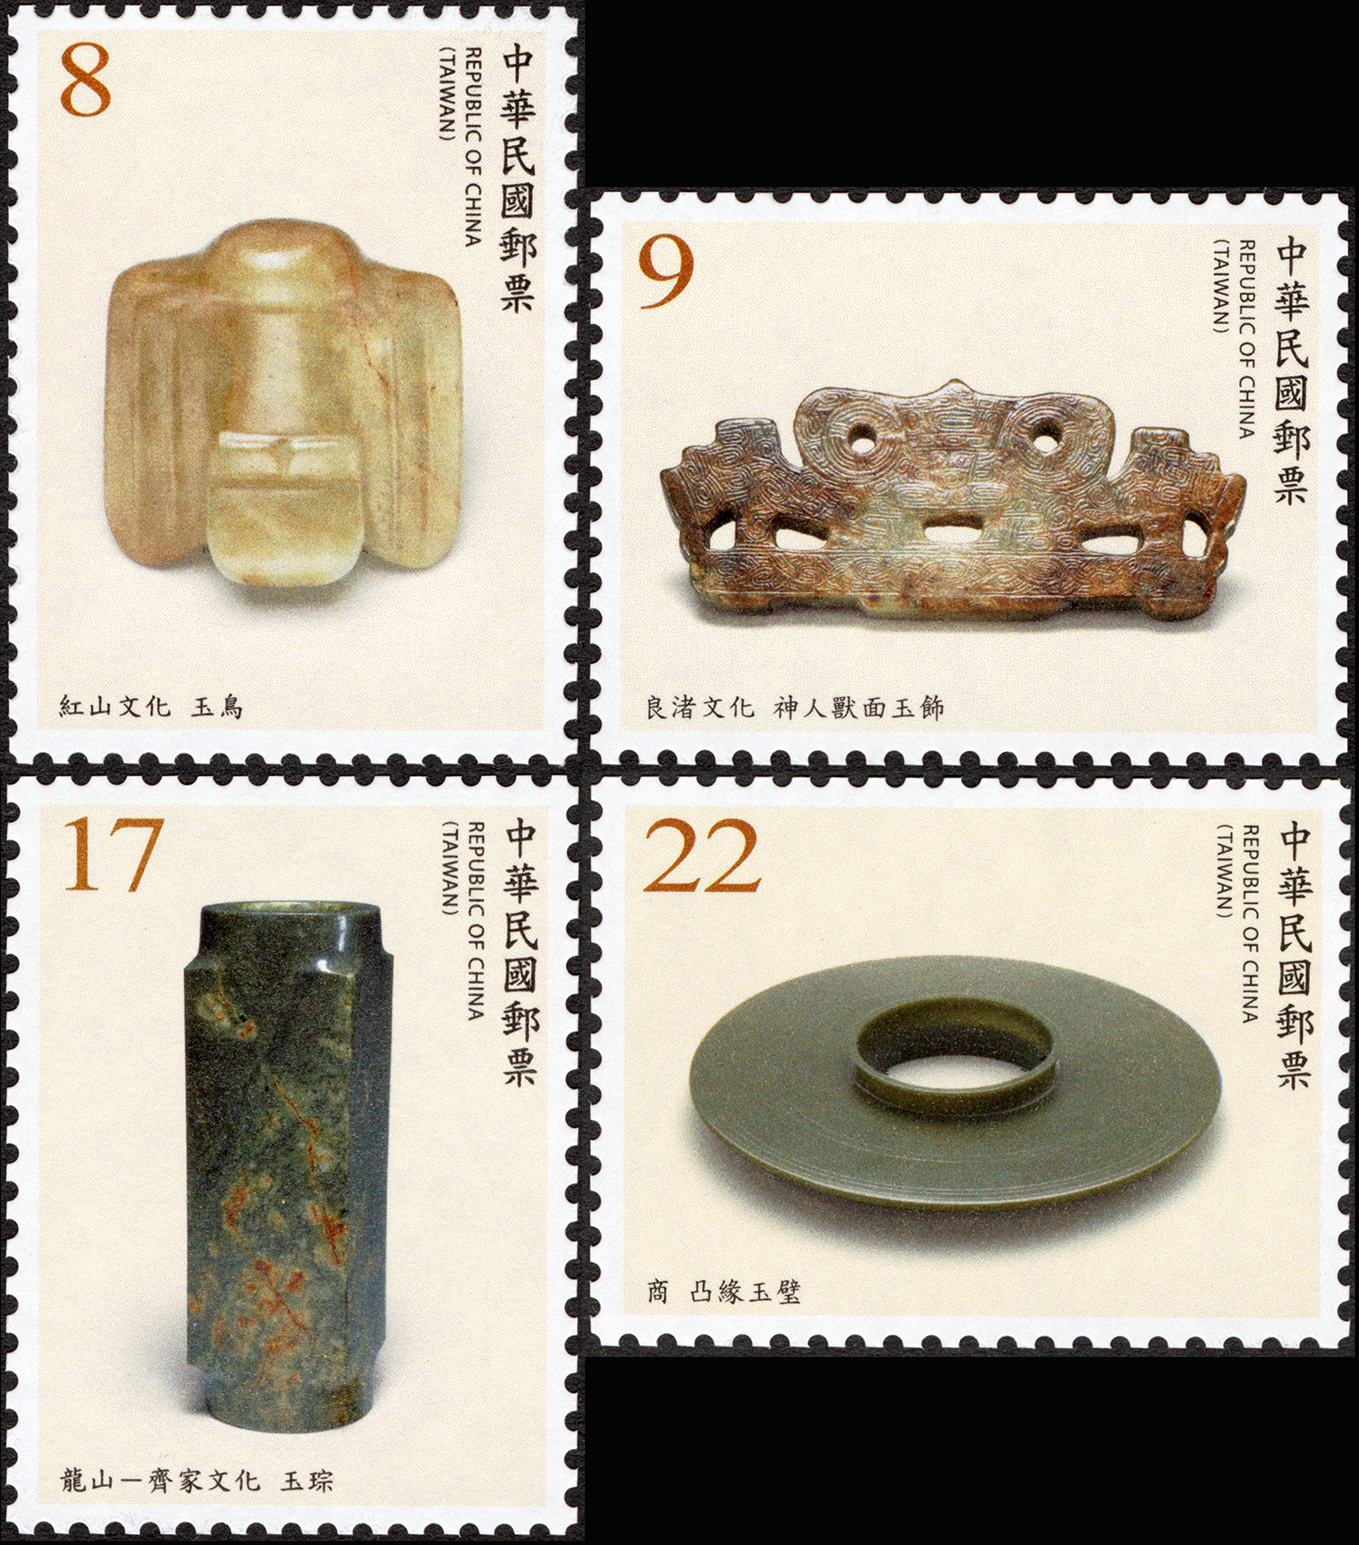 Jade Articles from the National Palace Museum Postage Stamps (Continued II)